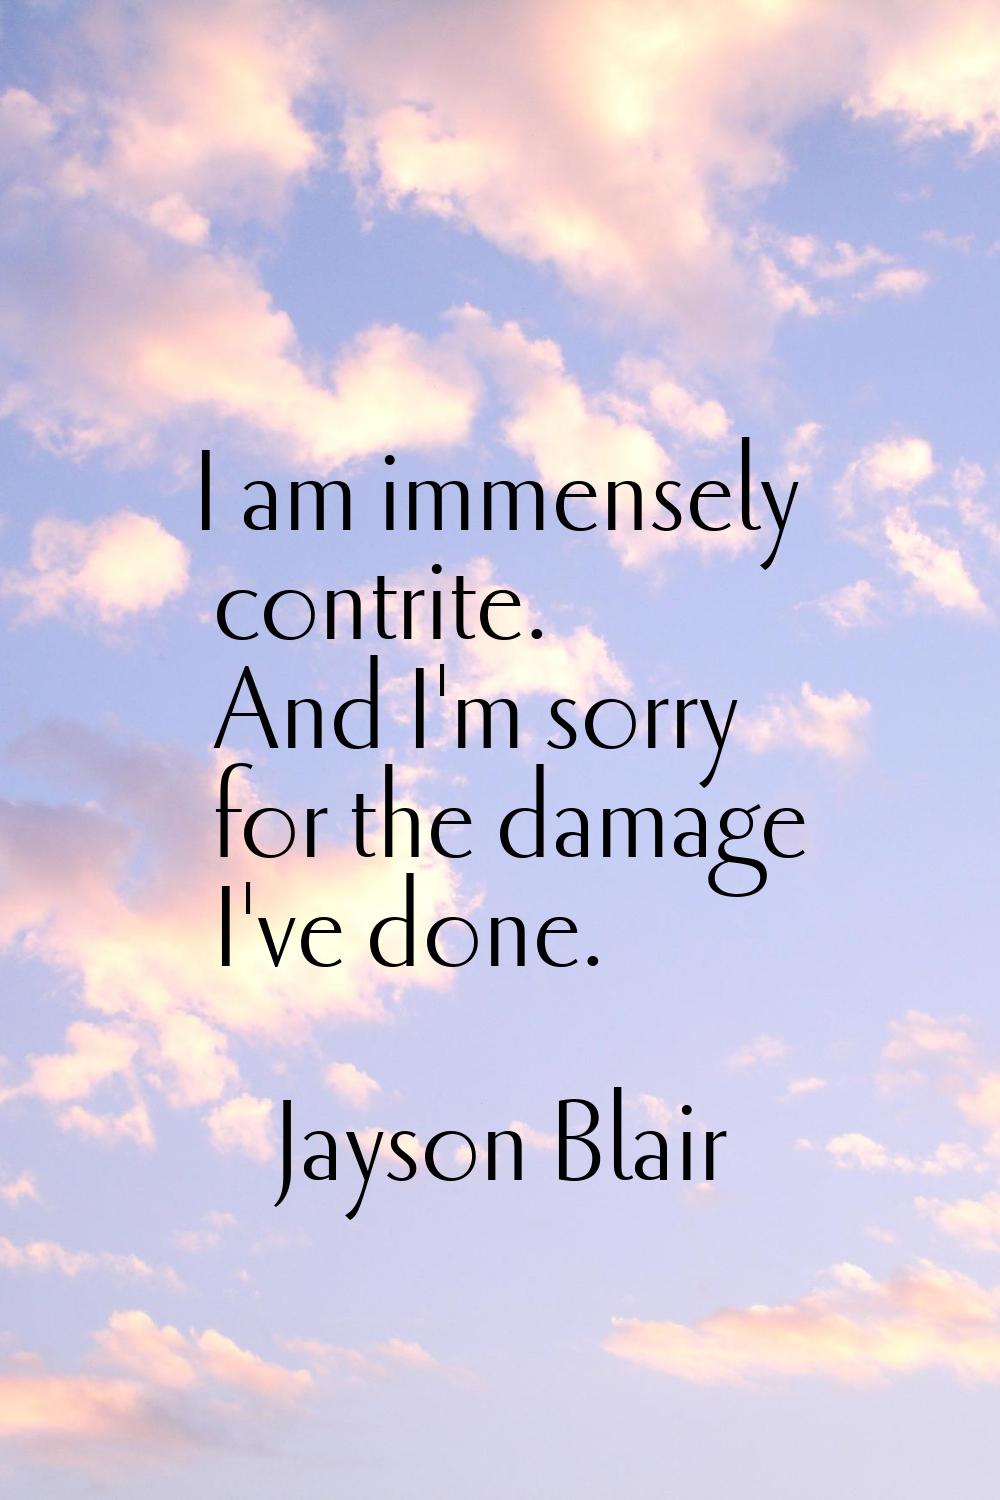 I am immensely contrite. And I'm sorry for the damage I've done.